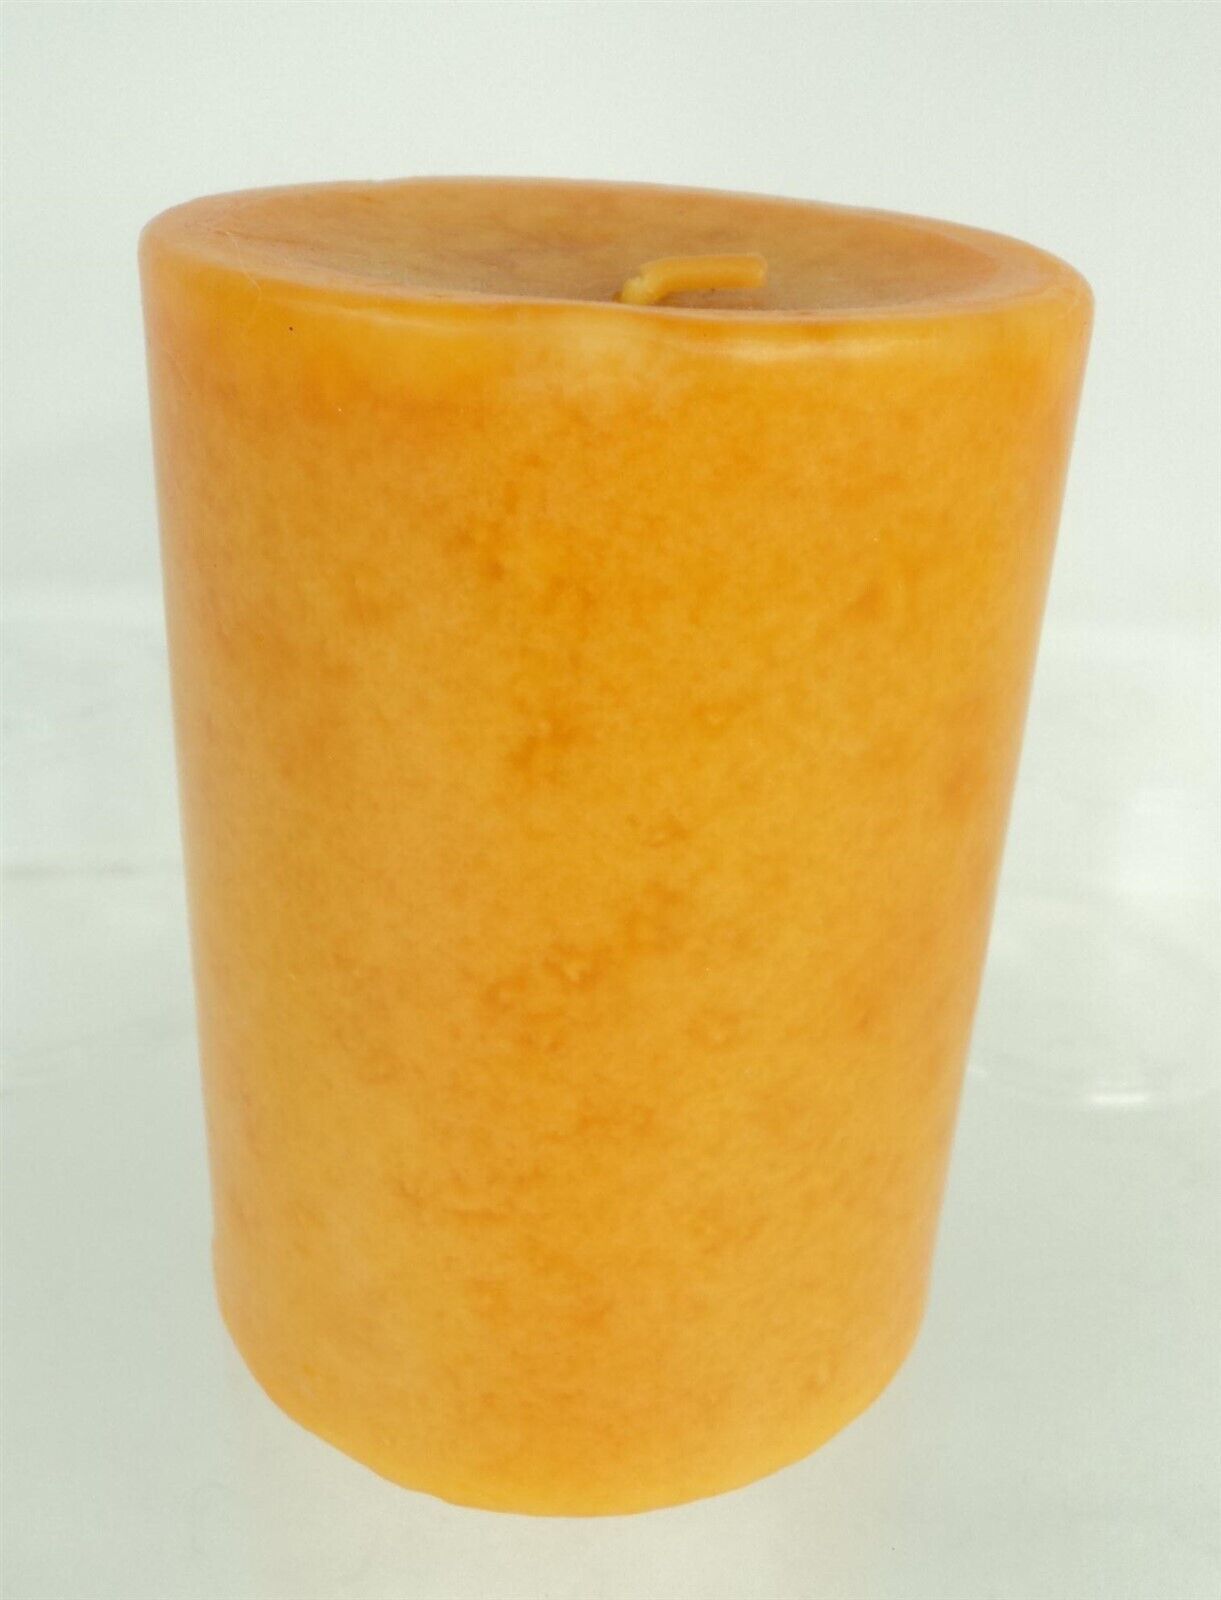 Pier 1 Scented 14 oz Pillar Candle 3"x4" - Pumpkin Bread - New - EXTREMELY RARE! - $24.14